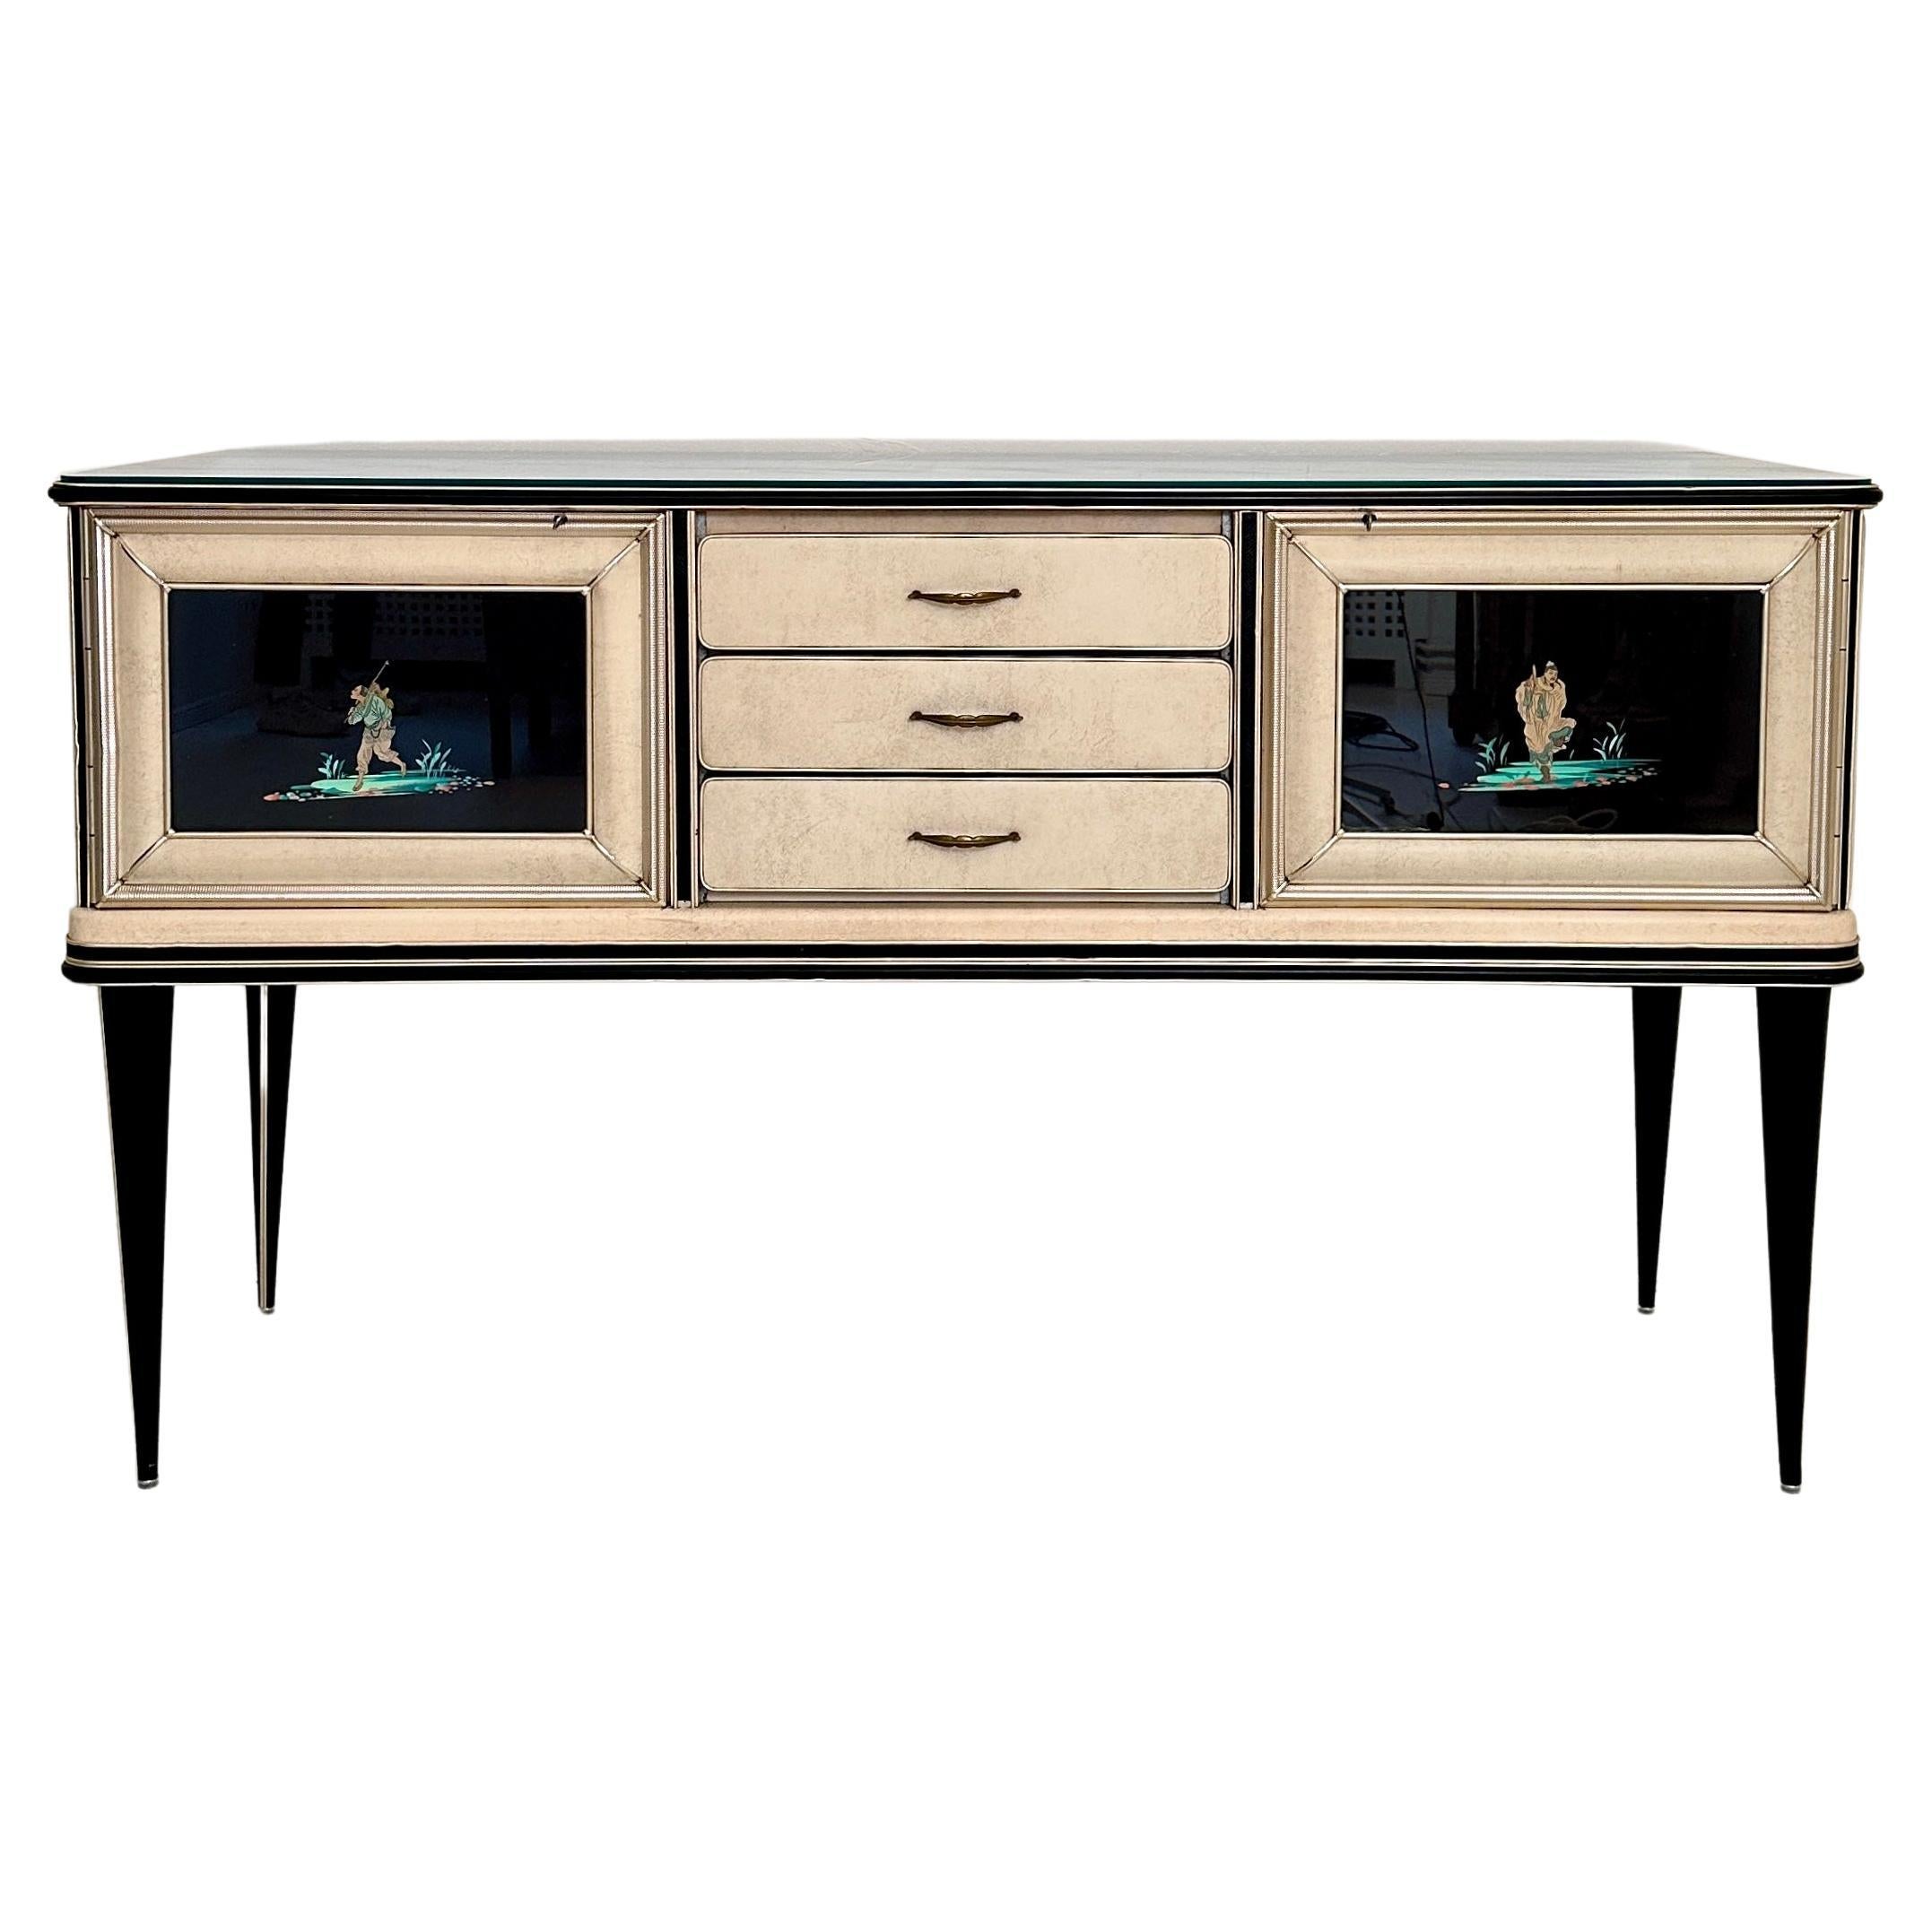 Mid-Century Chinoserie Sideboard by Umberto Mascagni for Harrods London, 1953 For Sale